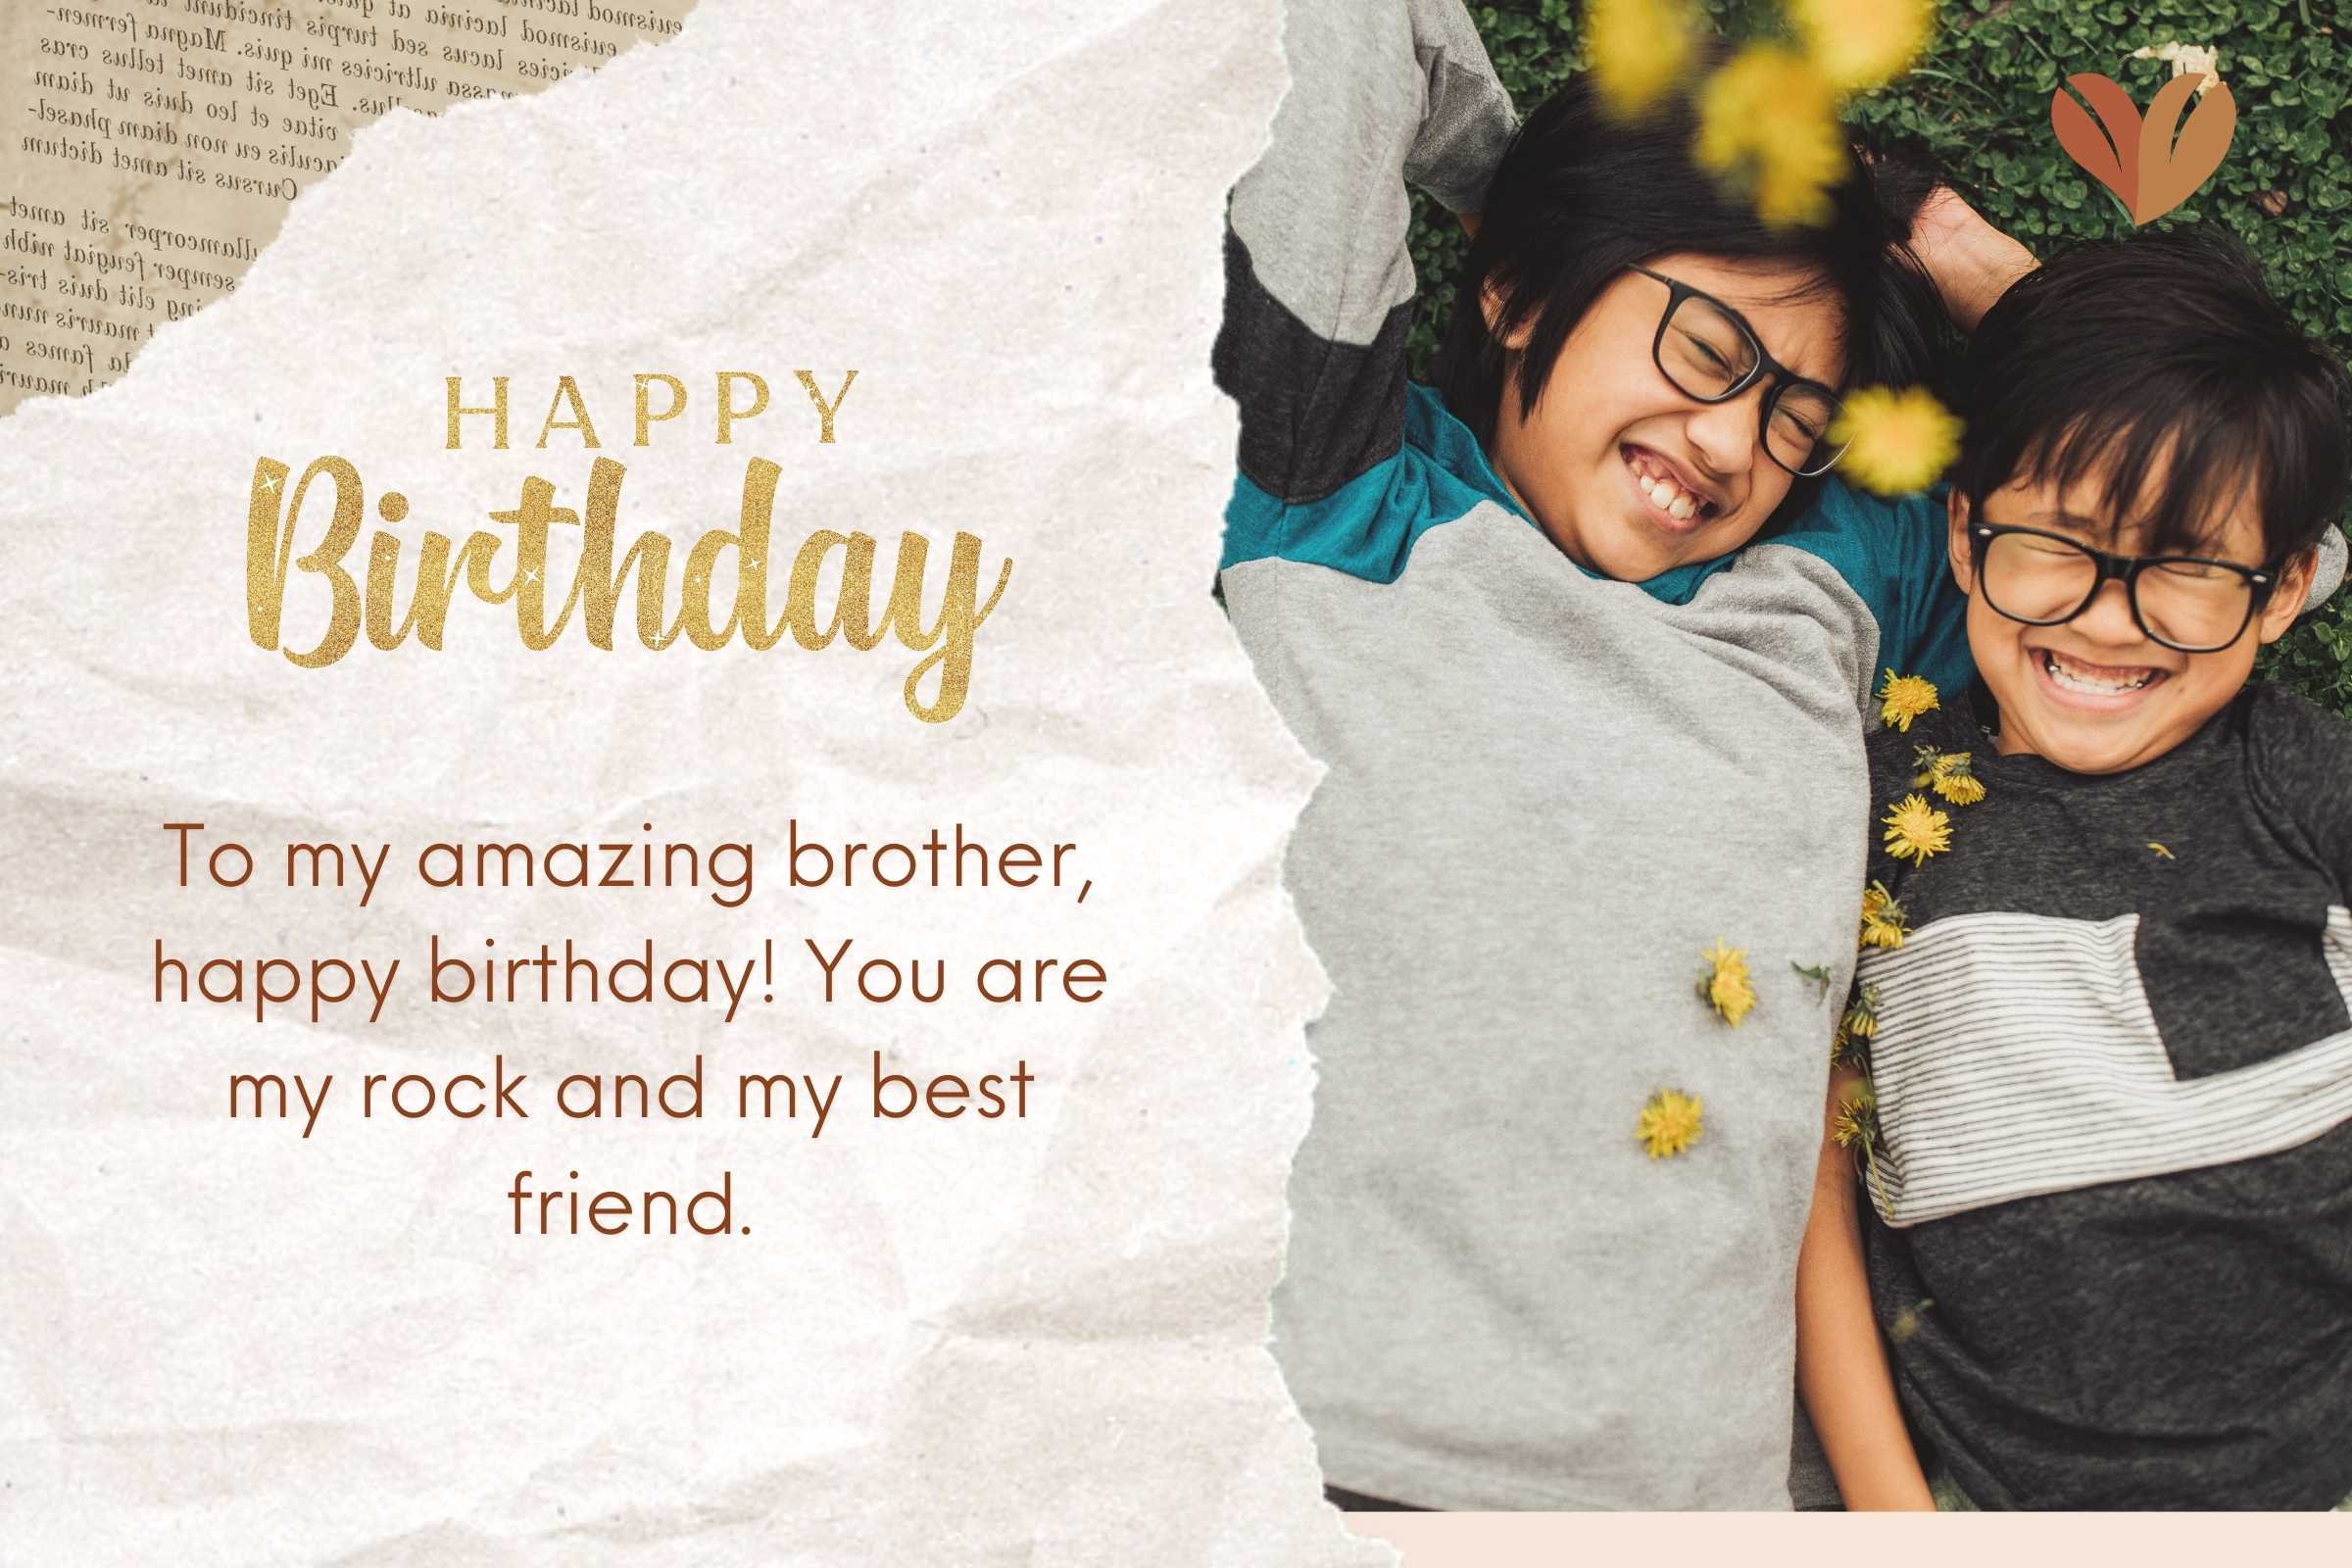 Brothers bonding in laughter, celebrating with heartfelt 'happy birthday big brother' wishes.